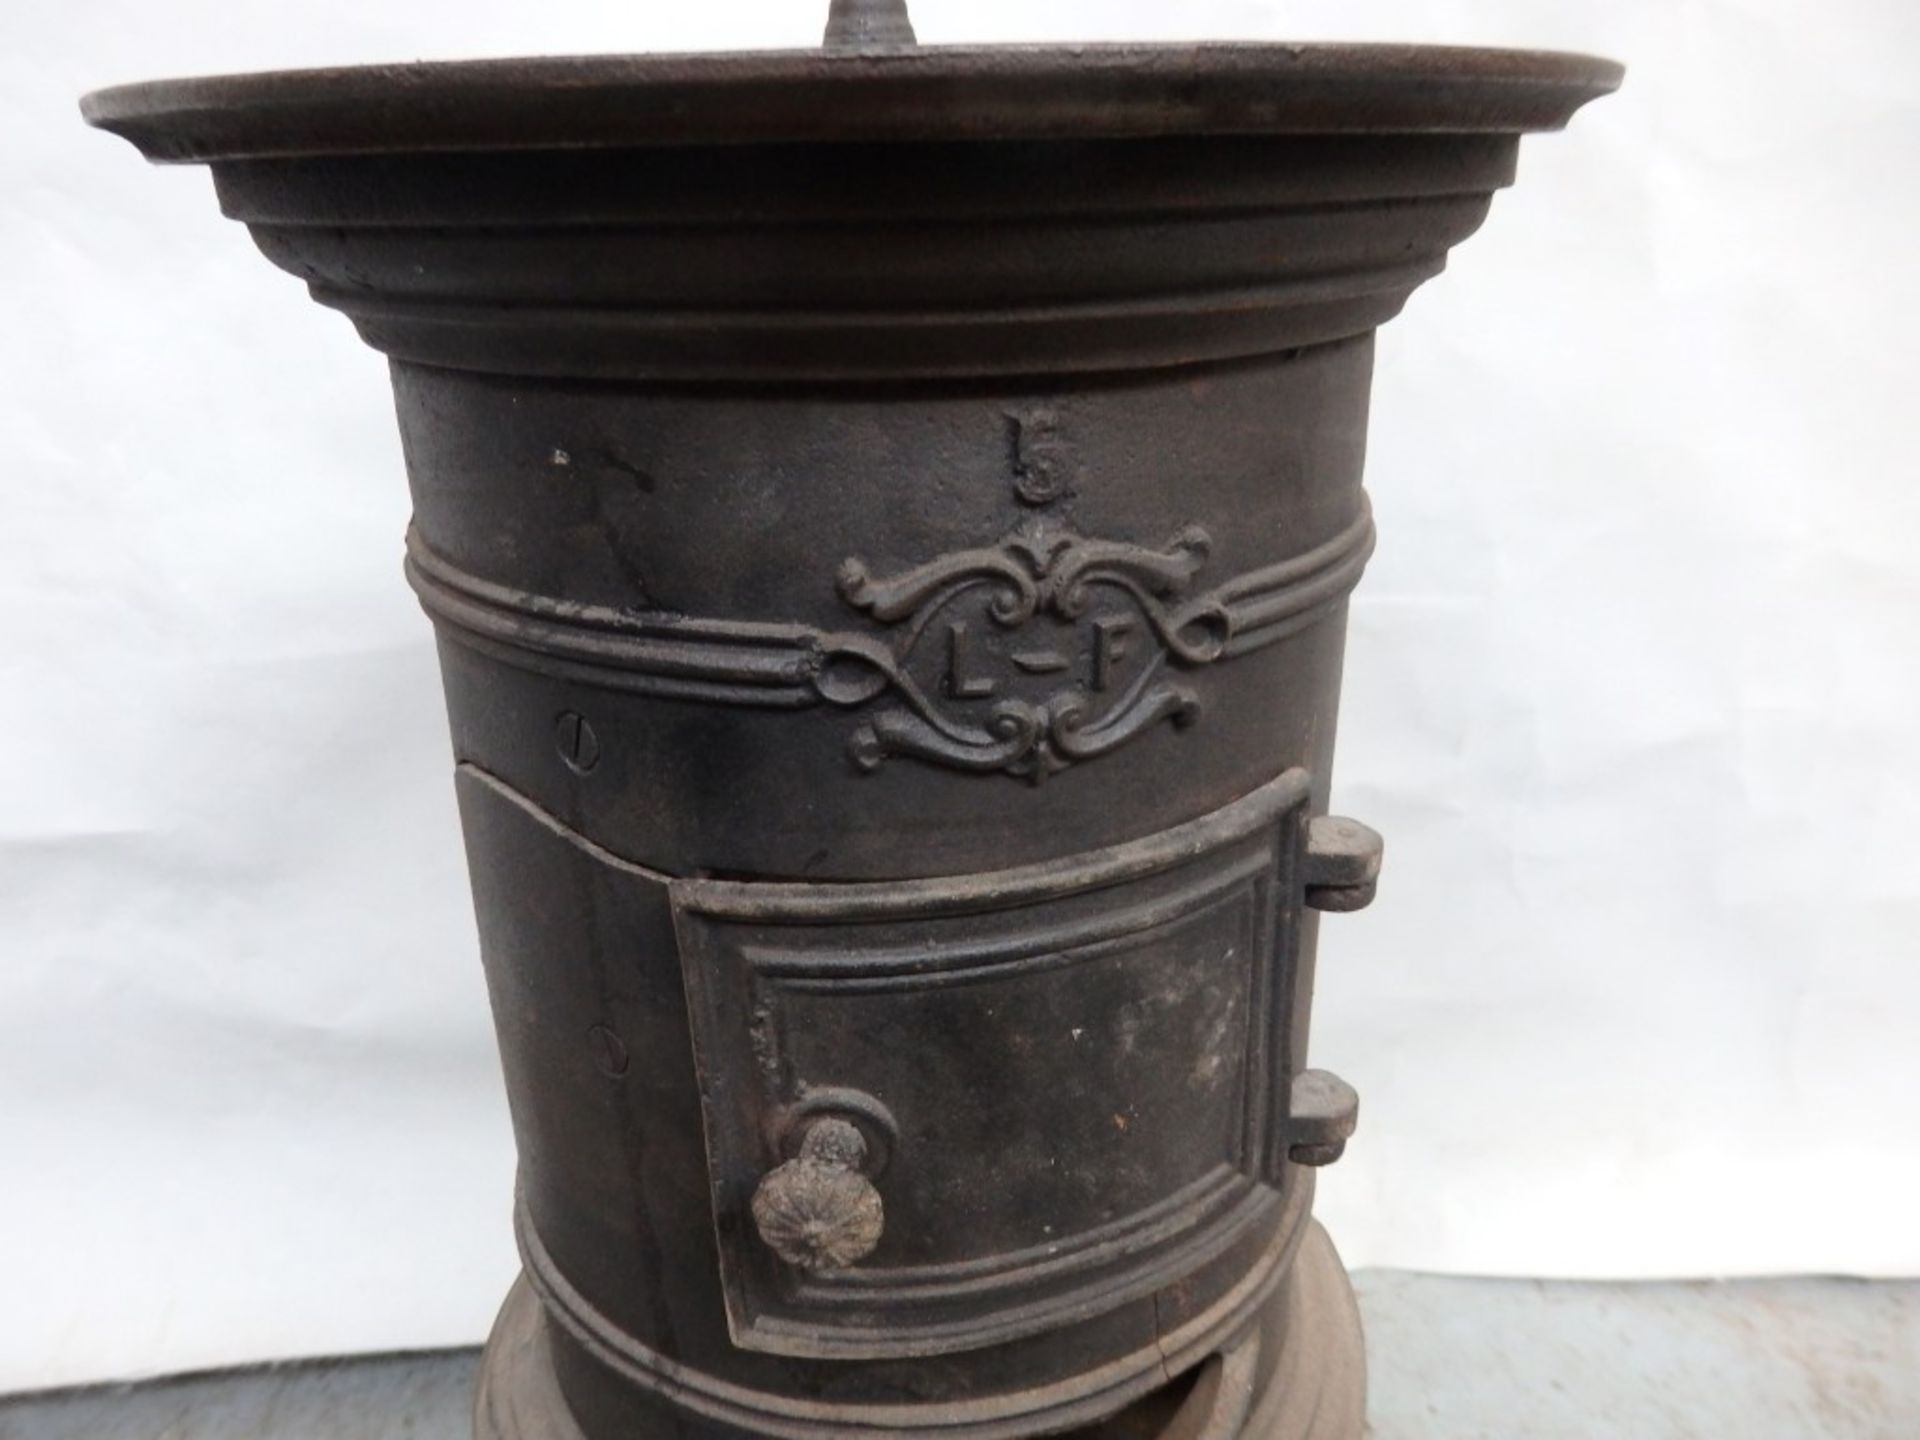 1 x Reclaimed Antique Cast Iron Potbelly Wood Burner / Stove - Dimensions: H61, Diameter 30cm - - Image 5 of 9